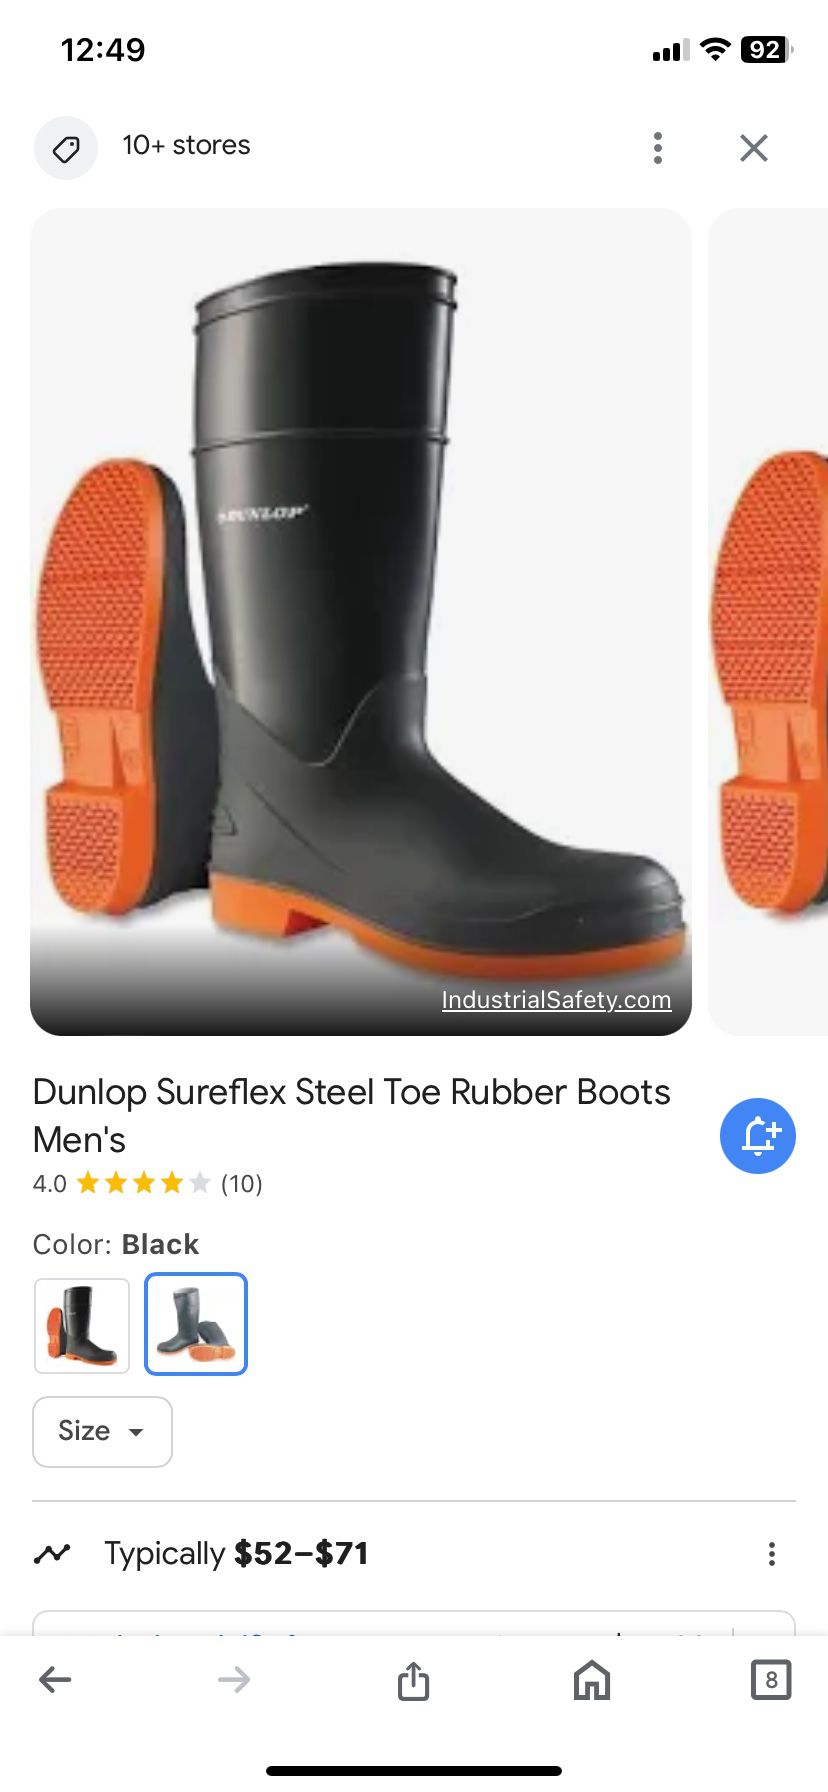 Steel Toe Rubber Boots - NEW!!